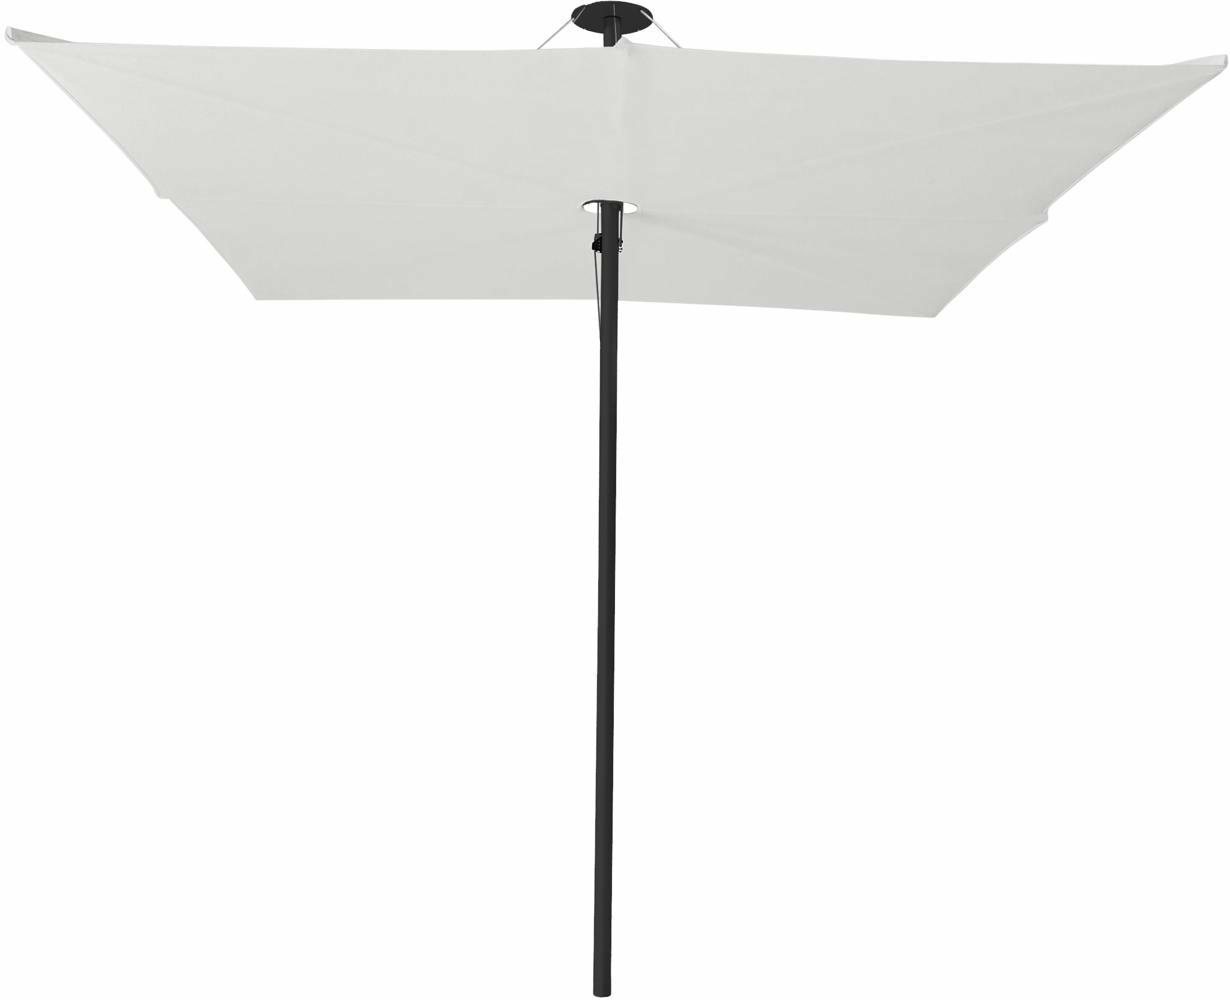 Infina center post umbrella, 3 m square, with frame in Black and Solidum Canvas canopy.